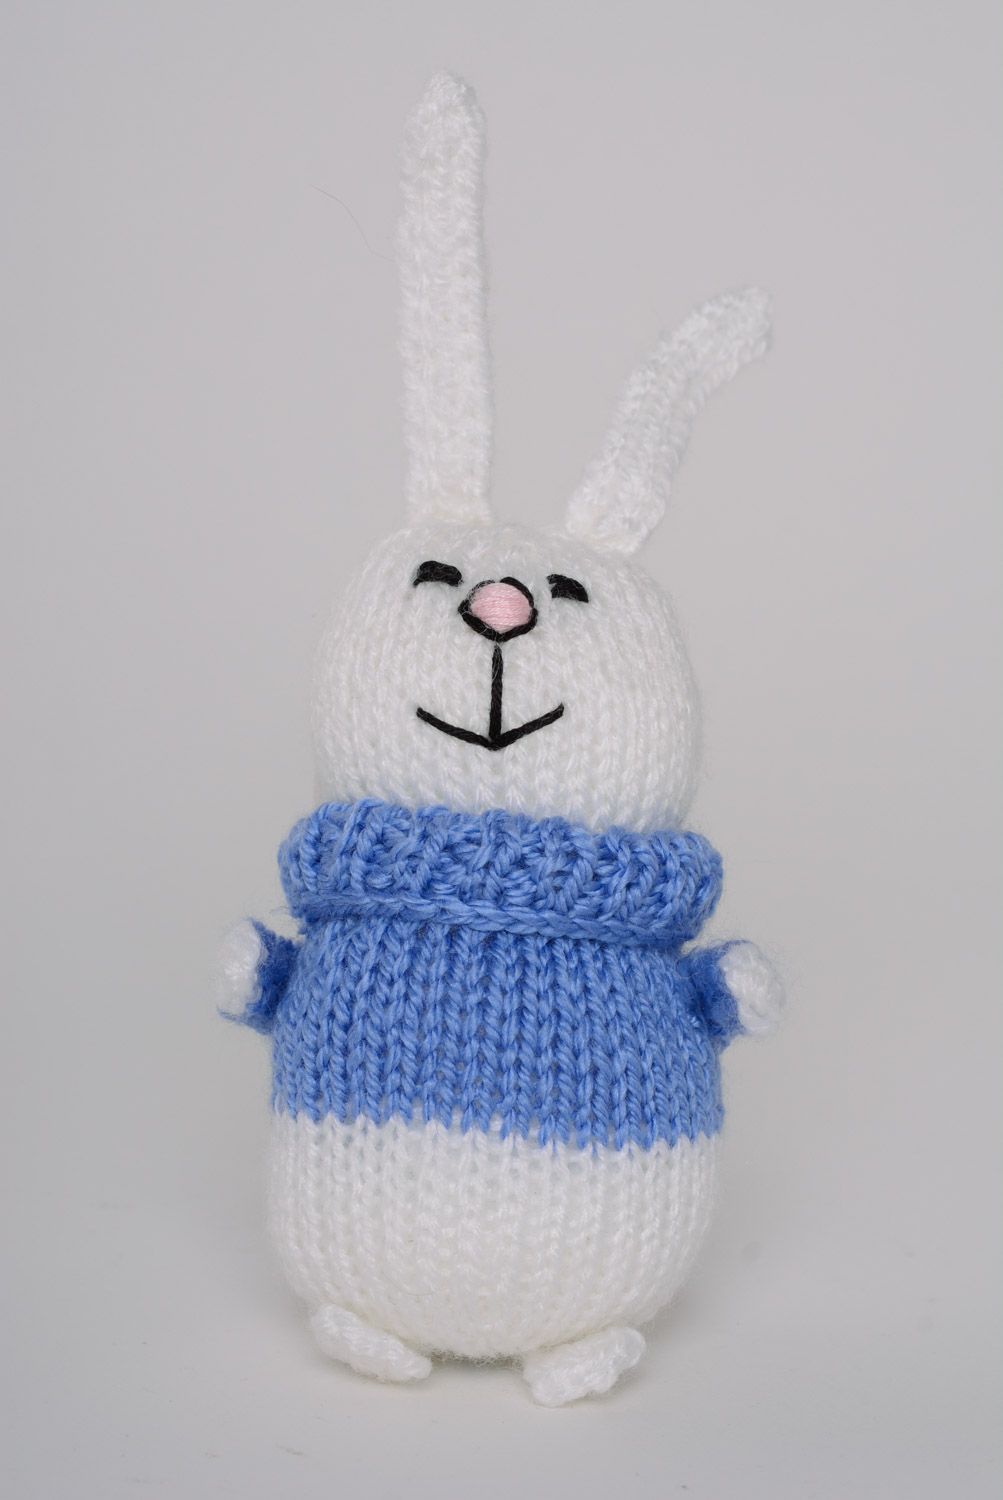 Handmade knitted soft toy smiling white bunny in blue sweater photo 1